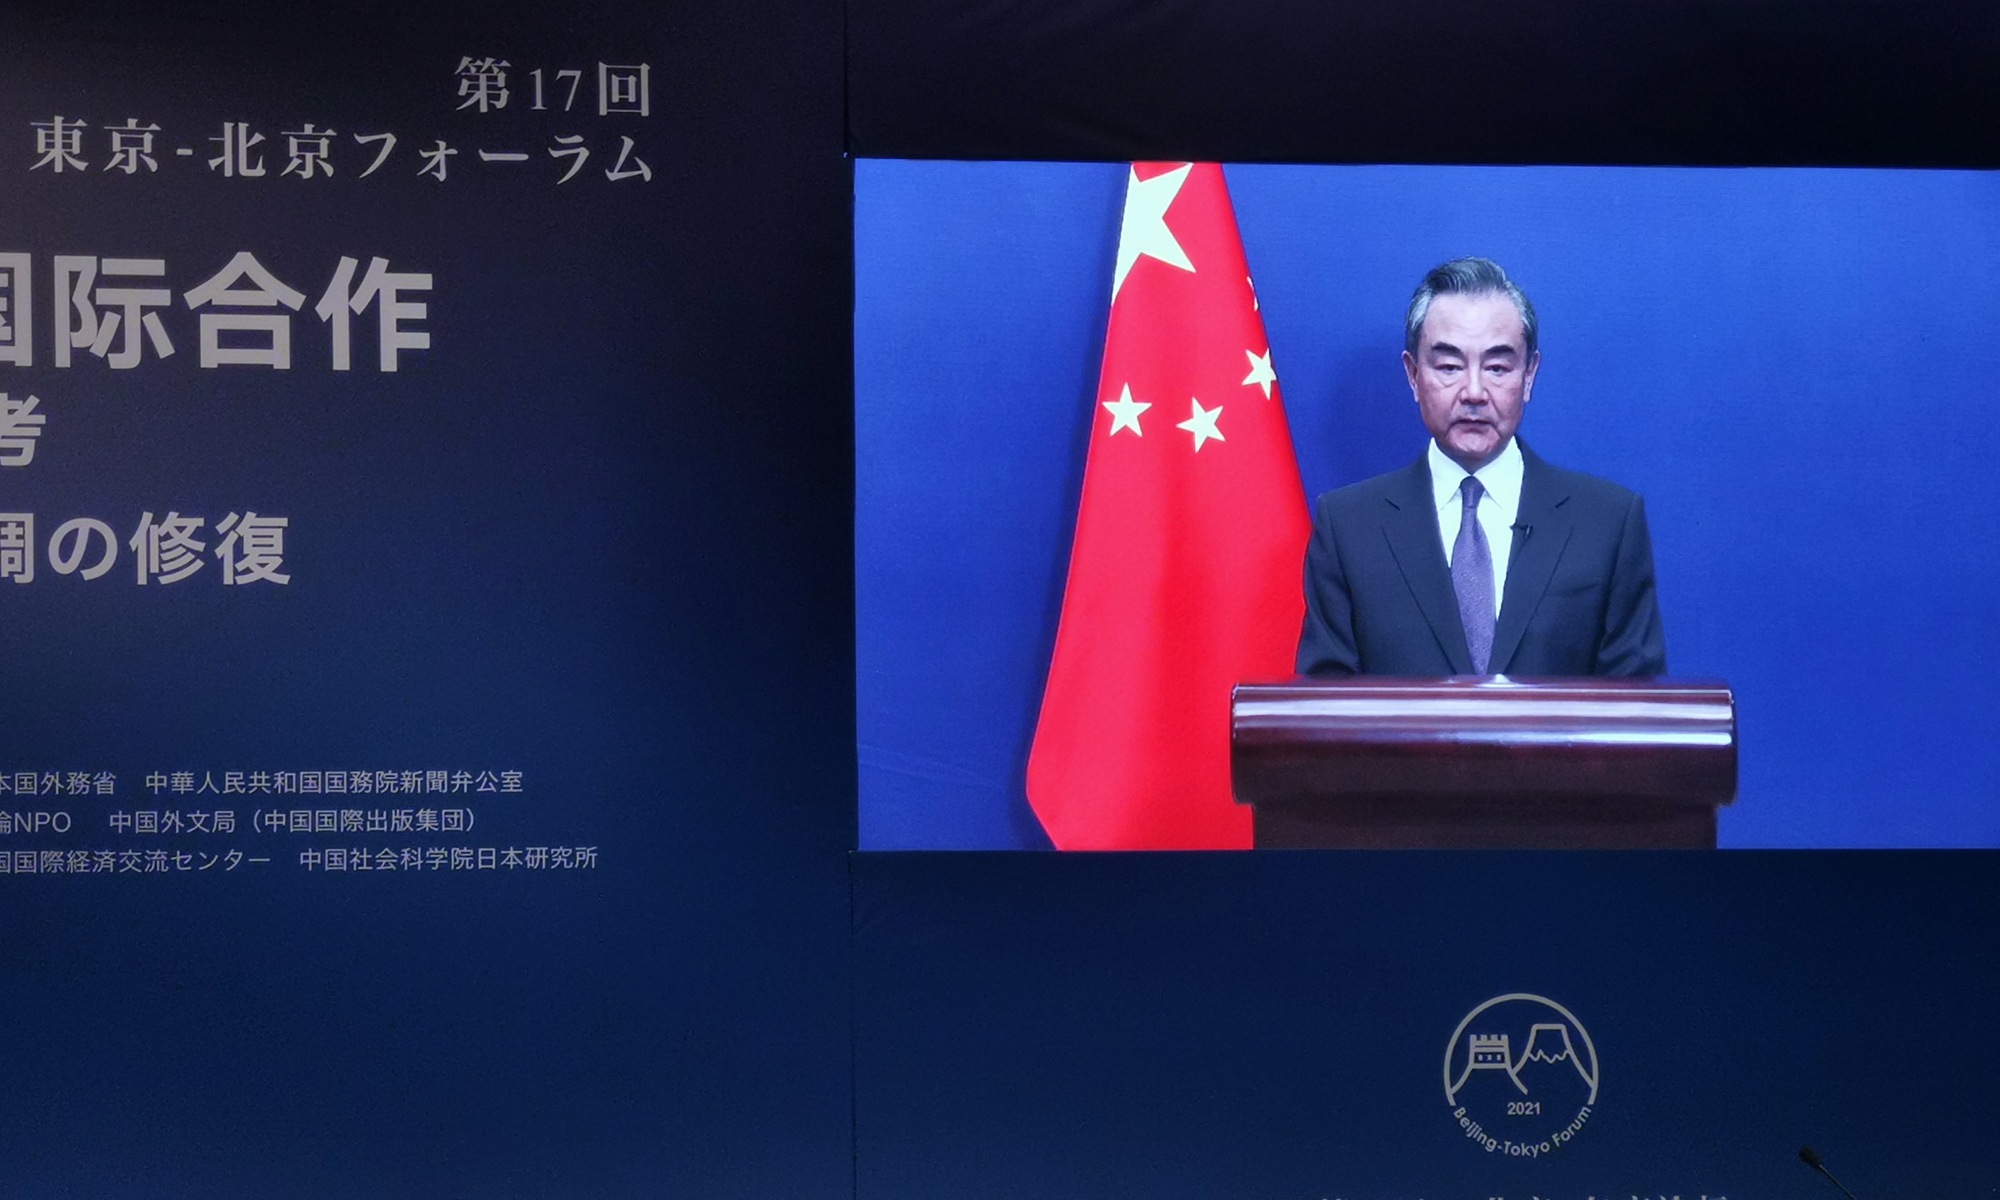 Wang Yi gives a speech at the opening ceremony of the 17th Annual Beijing-Tokyo Forum via video link on October 25, 2021. Photo: Xu Keyue/GT